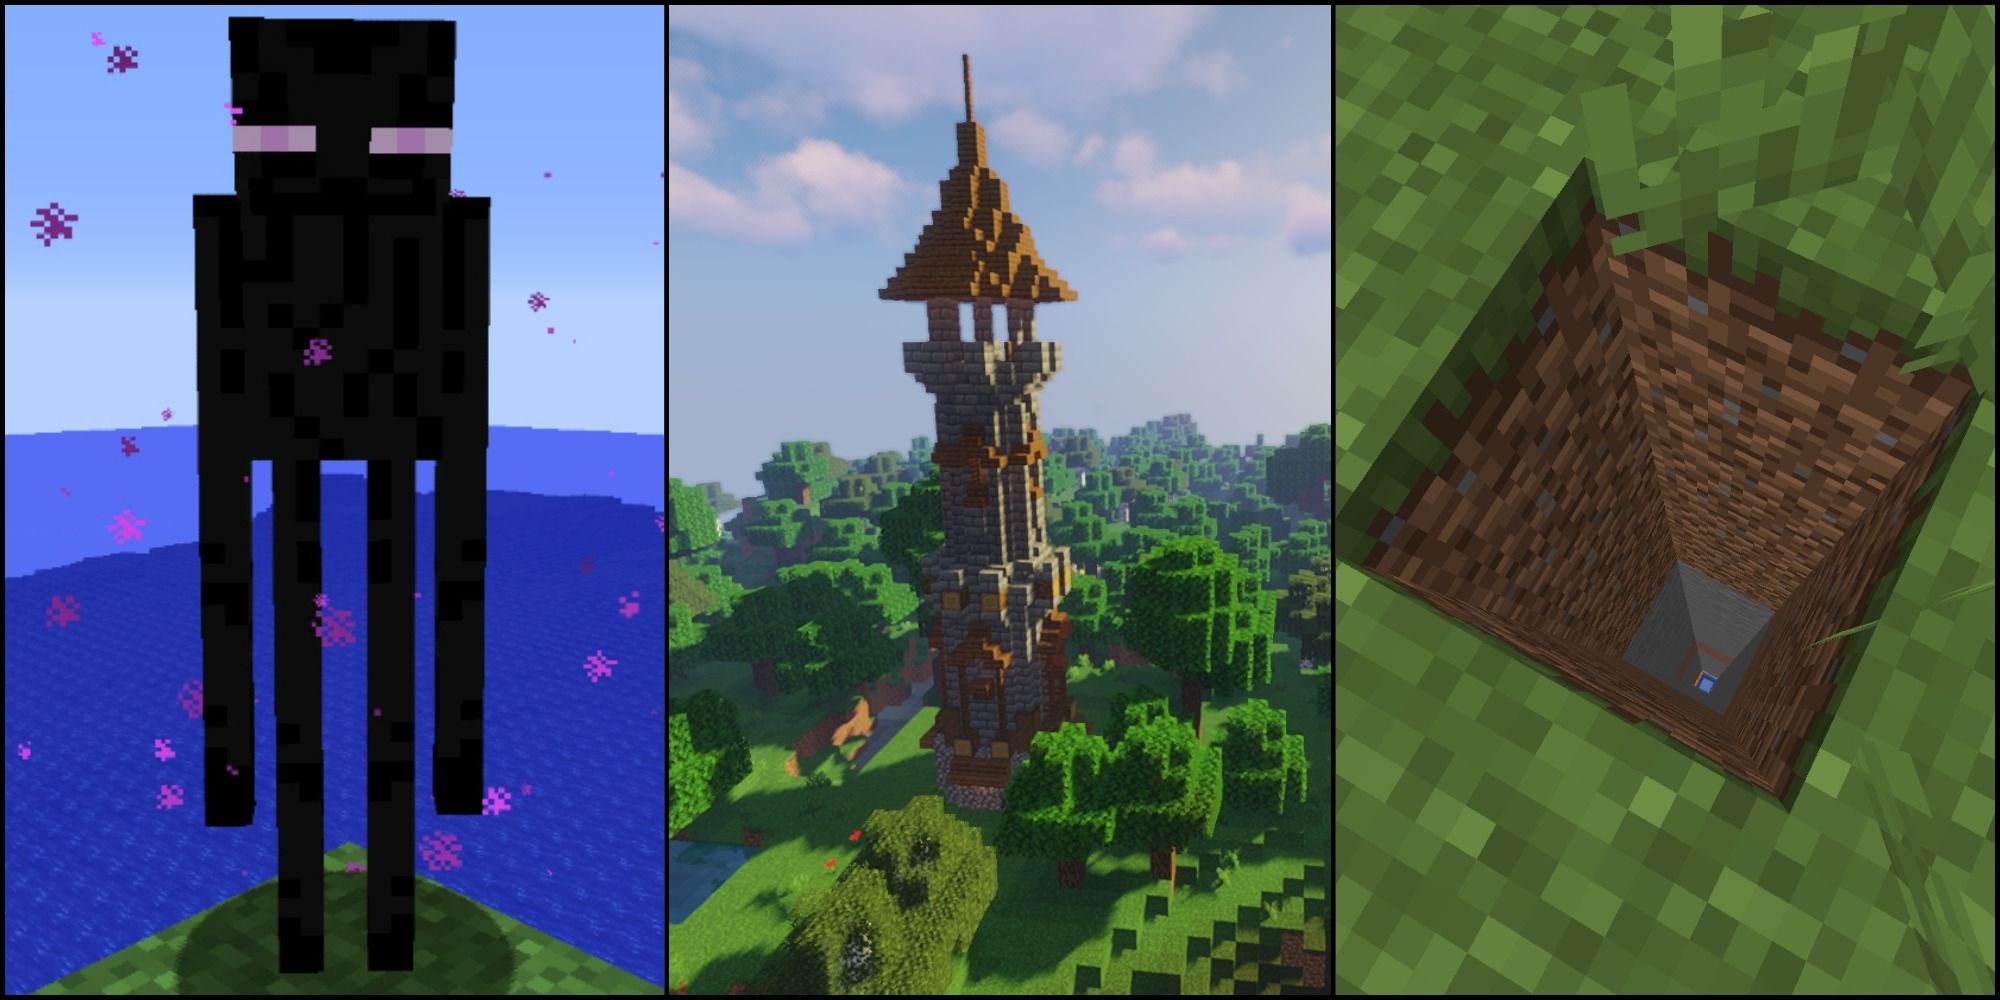 A split image for Minecraft featuring an Enderman to the left, a tower in the middle and a shaft straight down to the right